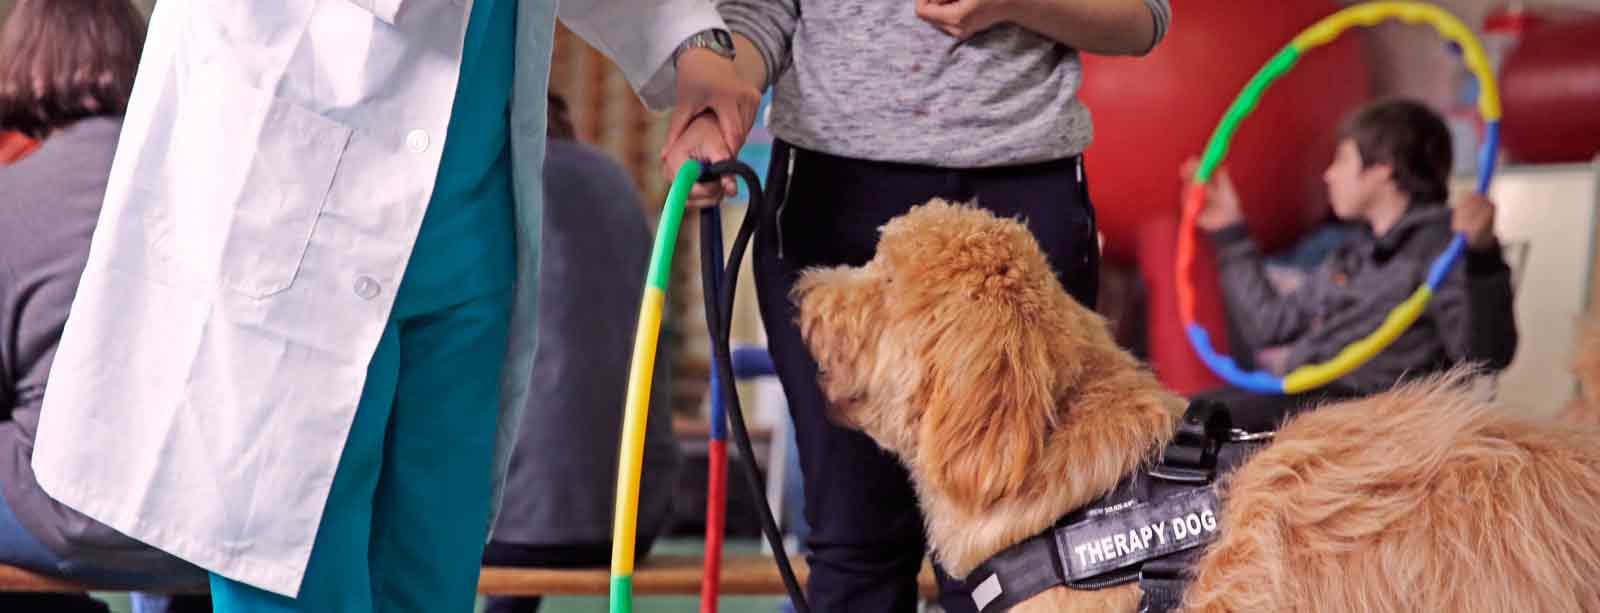 therapy dog with user and technician in assisted therapy with dogs